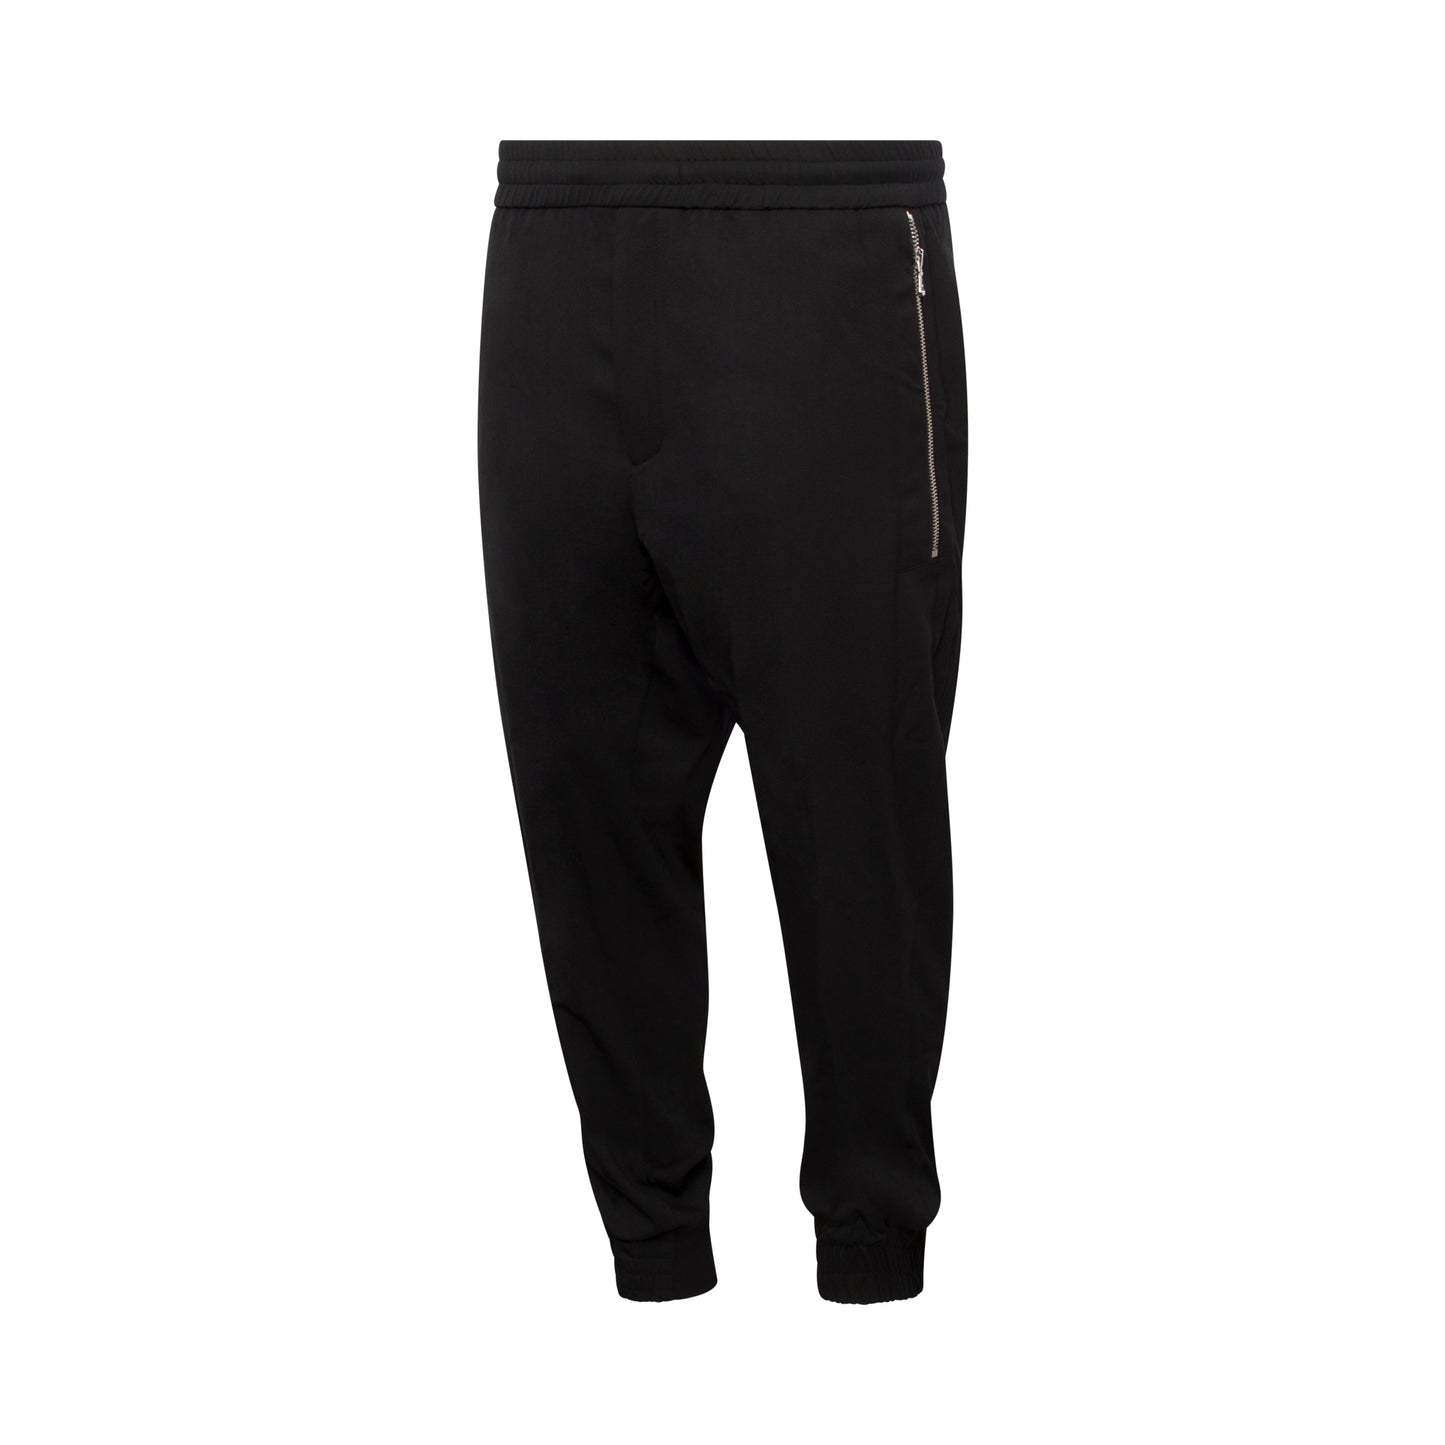 Classis Jogger Pants in Black